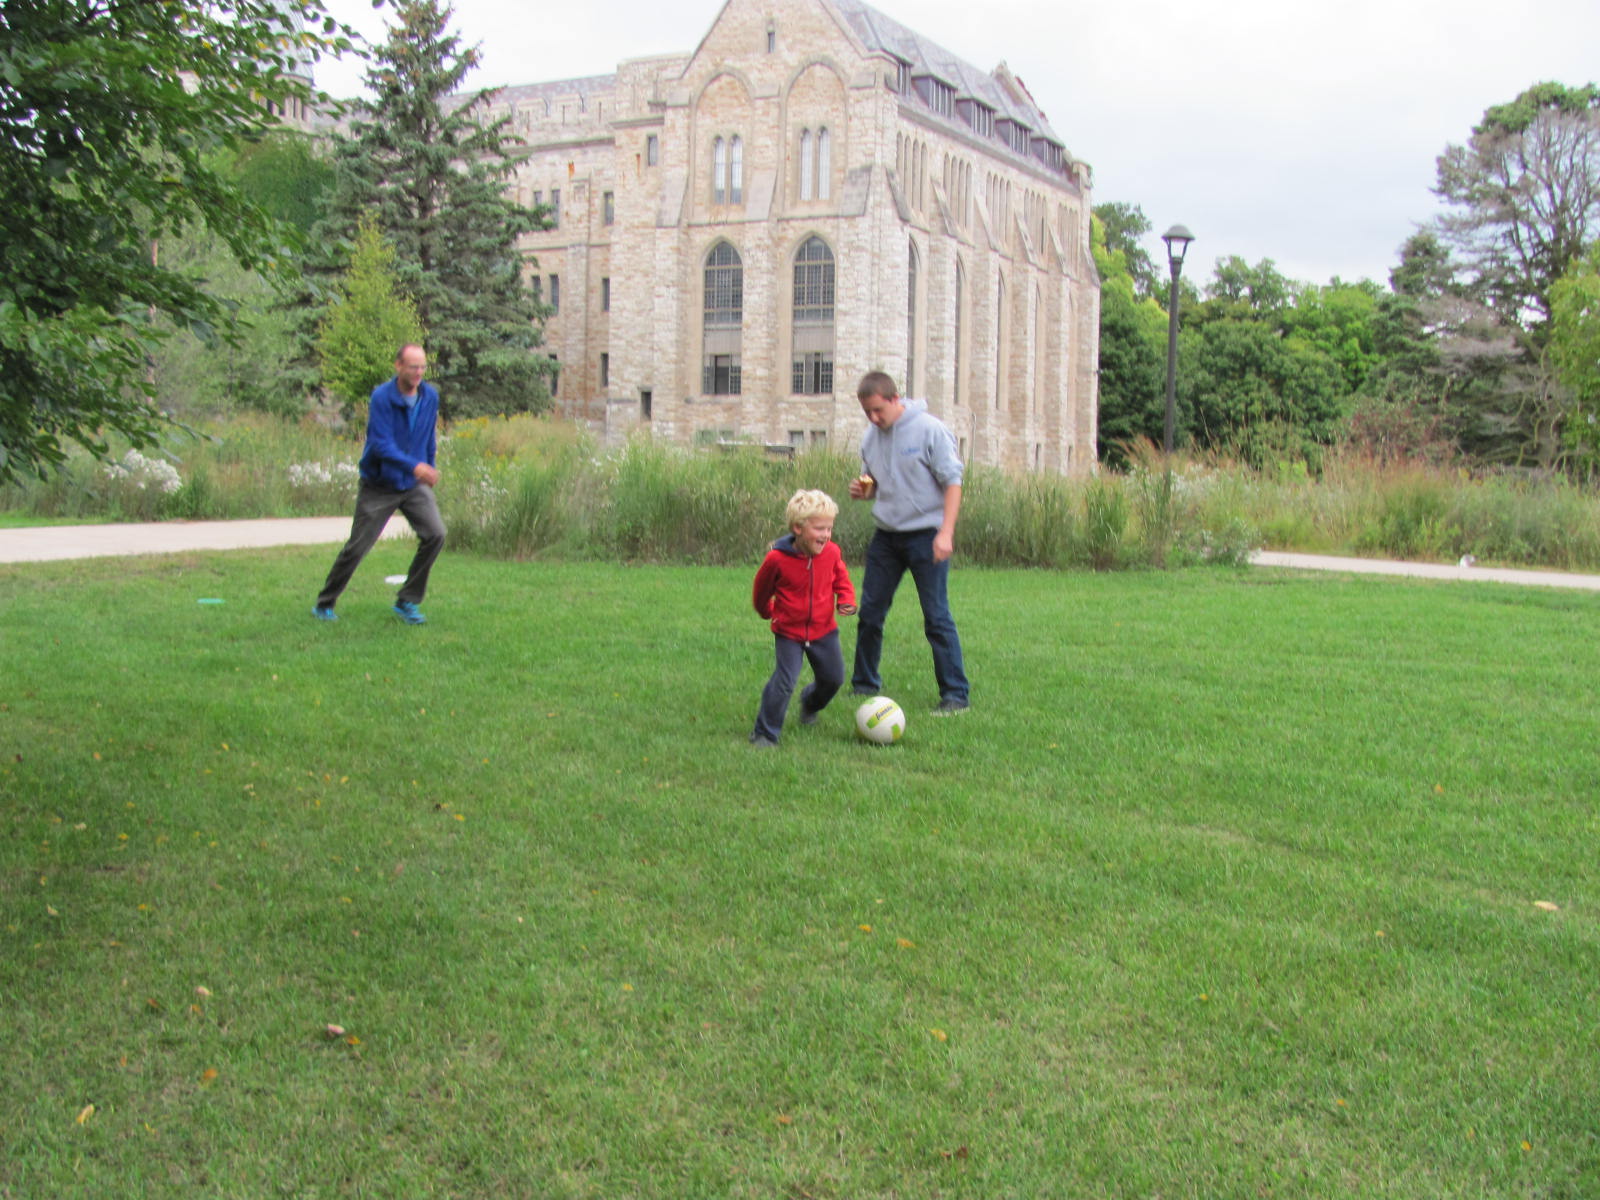 Playing a serious game of soccer with Prof. Brian Borovsky and his son.